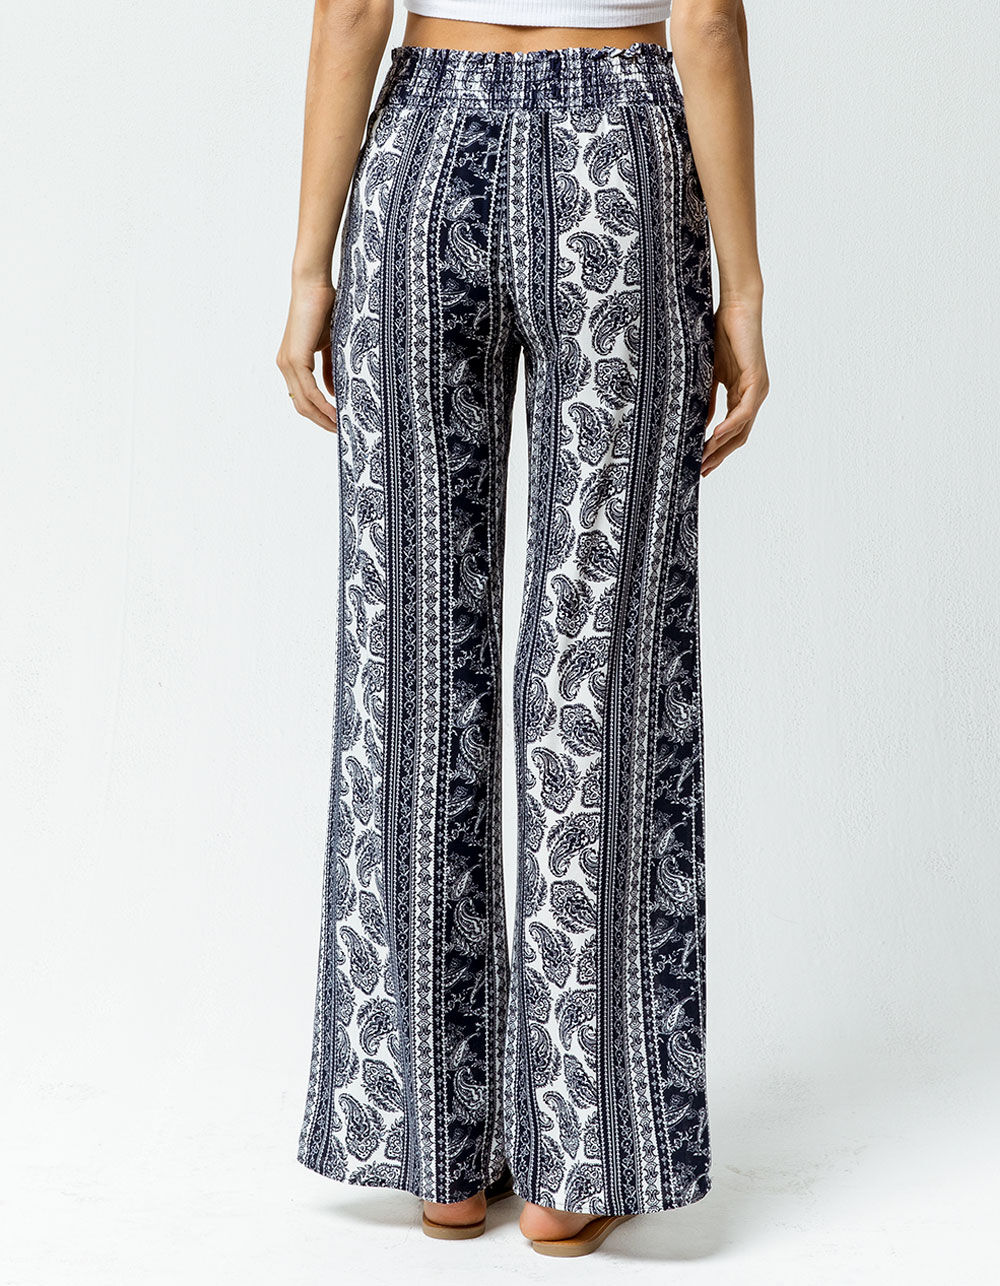 SKY AND SPARROW Linear Womens Wide Leg Pants - NAVY/WHITE | Tillys